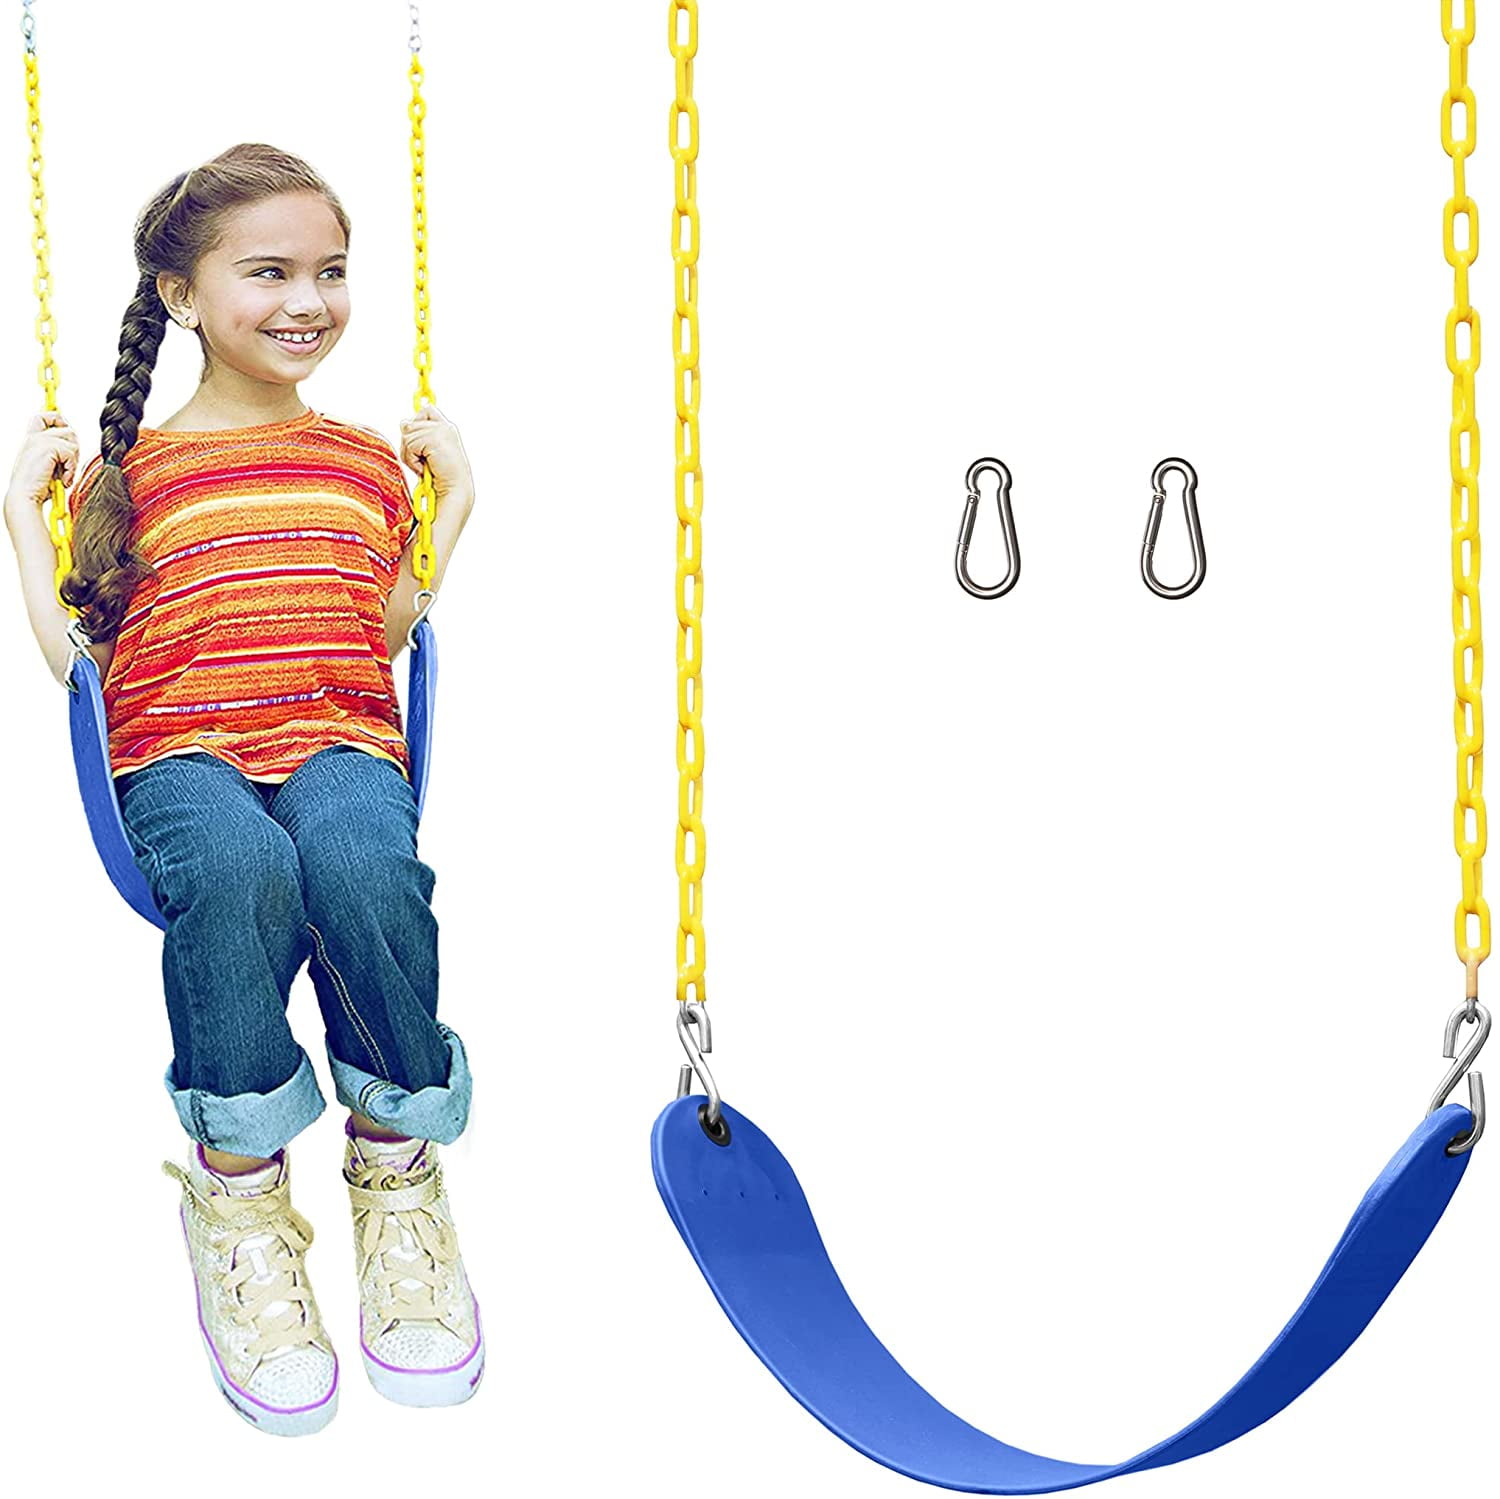 2 NEW HEAVY DUTY PAIR BLUE SWING SET SEAT CHAIN 5 1/2 FT VYNIL COATED PLAYGROUND 